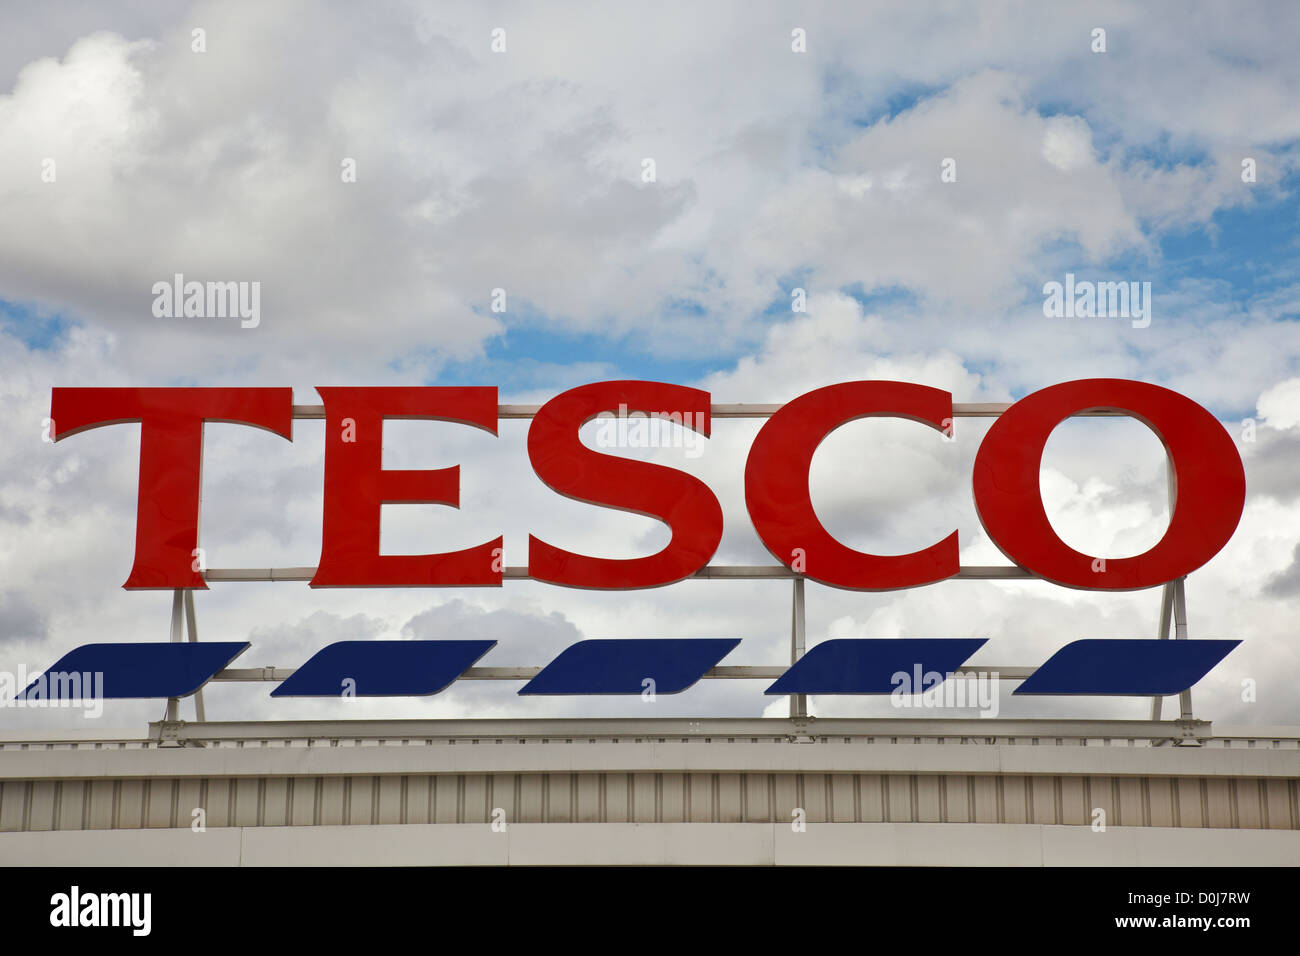 Generic image of a Tesco retail superstore sign. Stock Photo